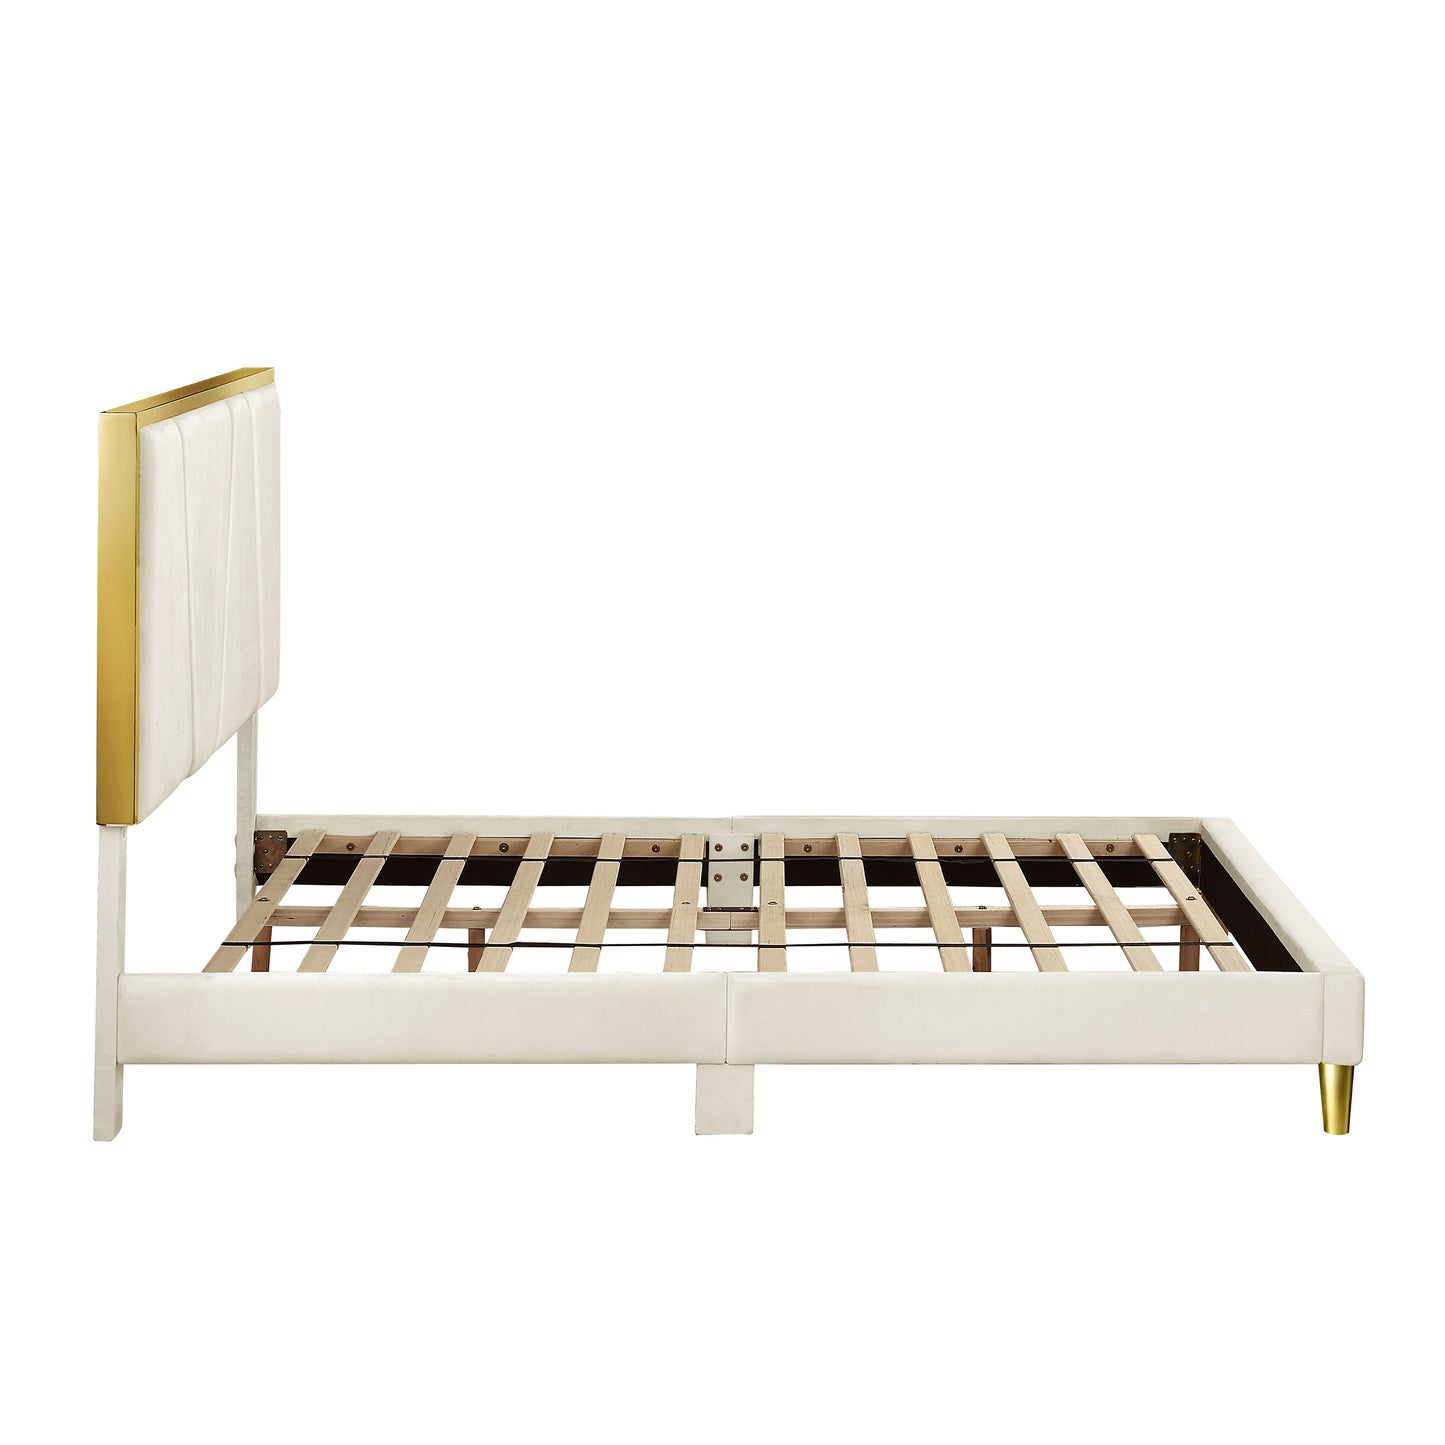 Front-facing side view of a contemporary beige and gold upholstered full bed with slats shown on a white background